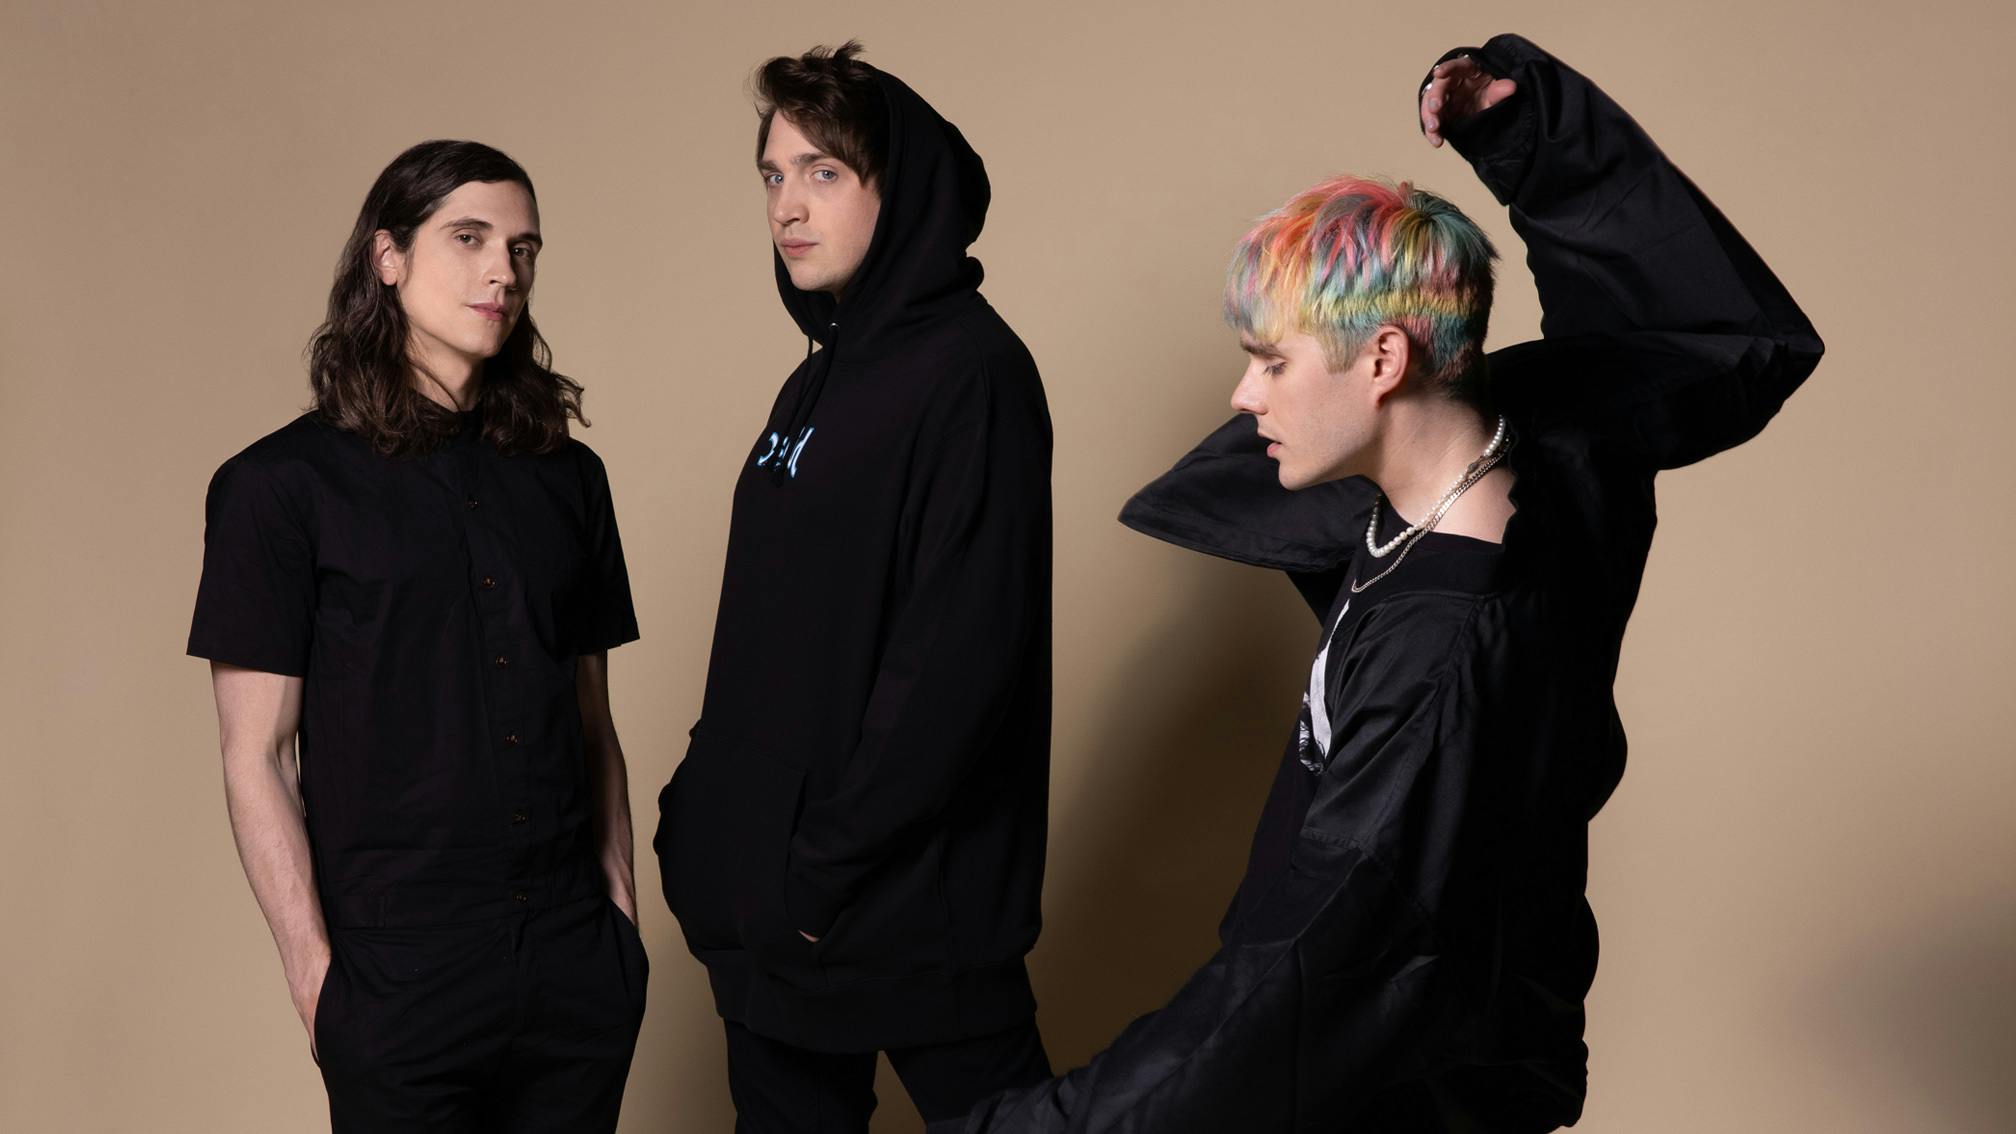 Waterparks’ Awsten Knight: “If your art’s not getting a reaction, then what are you doing?”